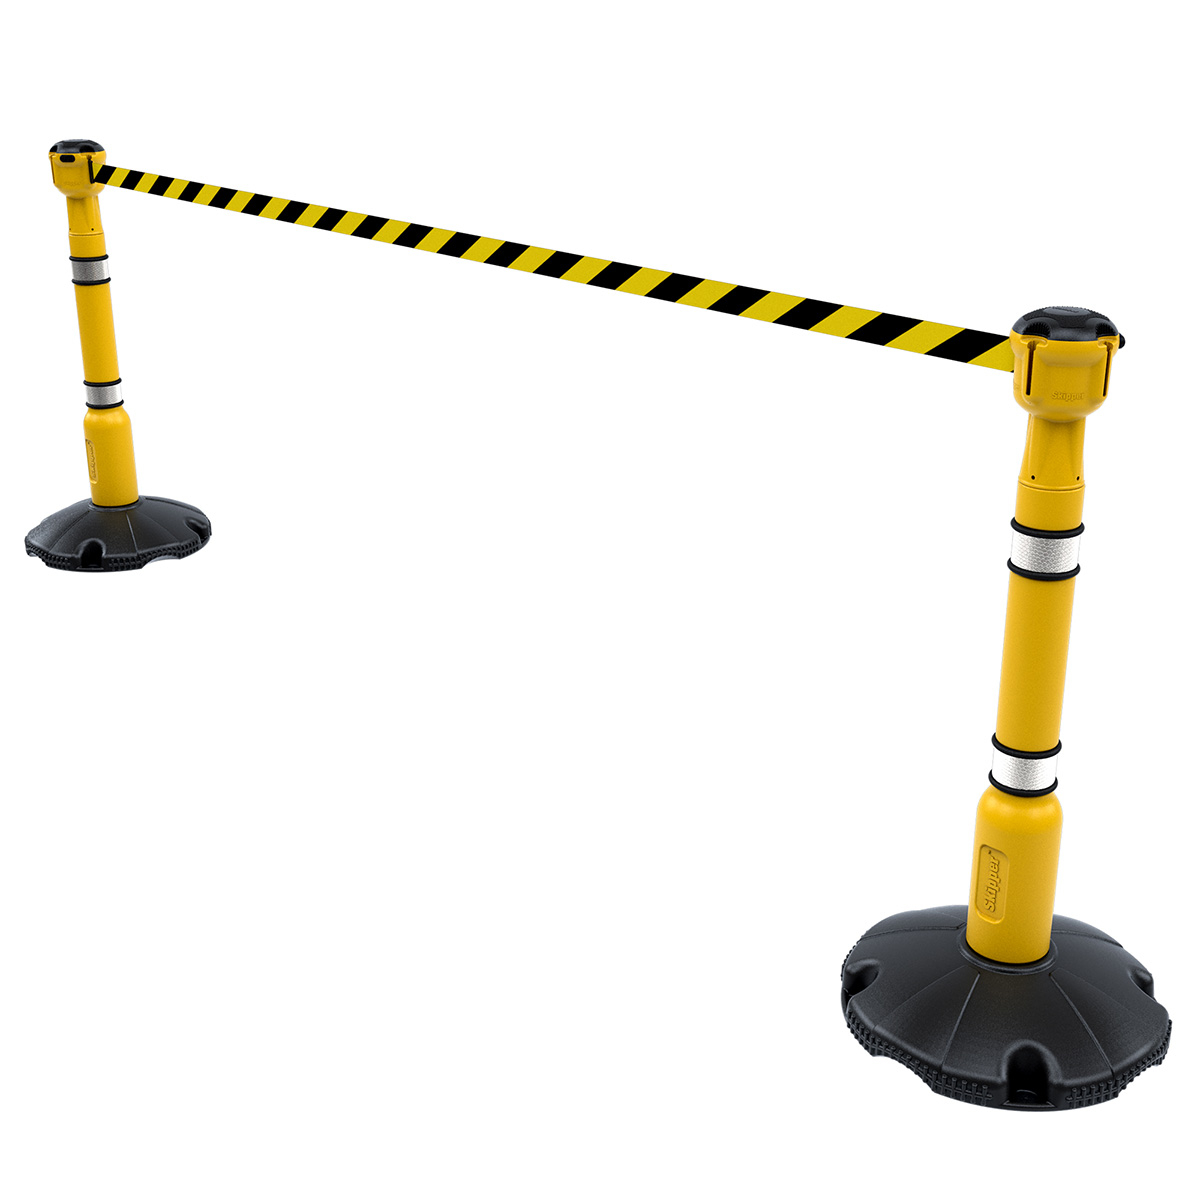 Skipper™ Retractable Barrier Kit 9m With Yellow Posts And Black and Yellow Chevron Tape